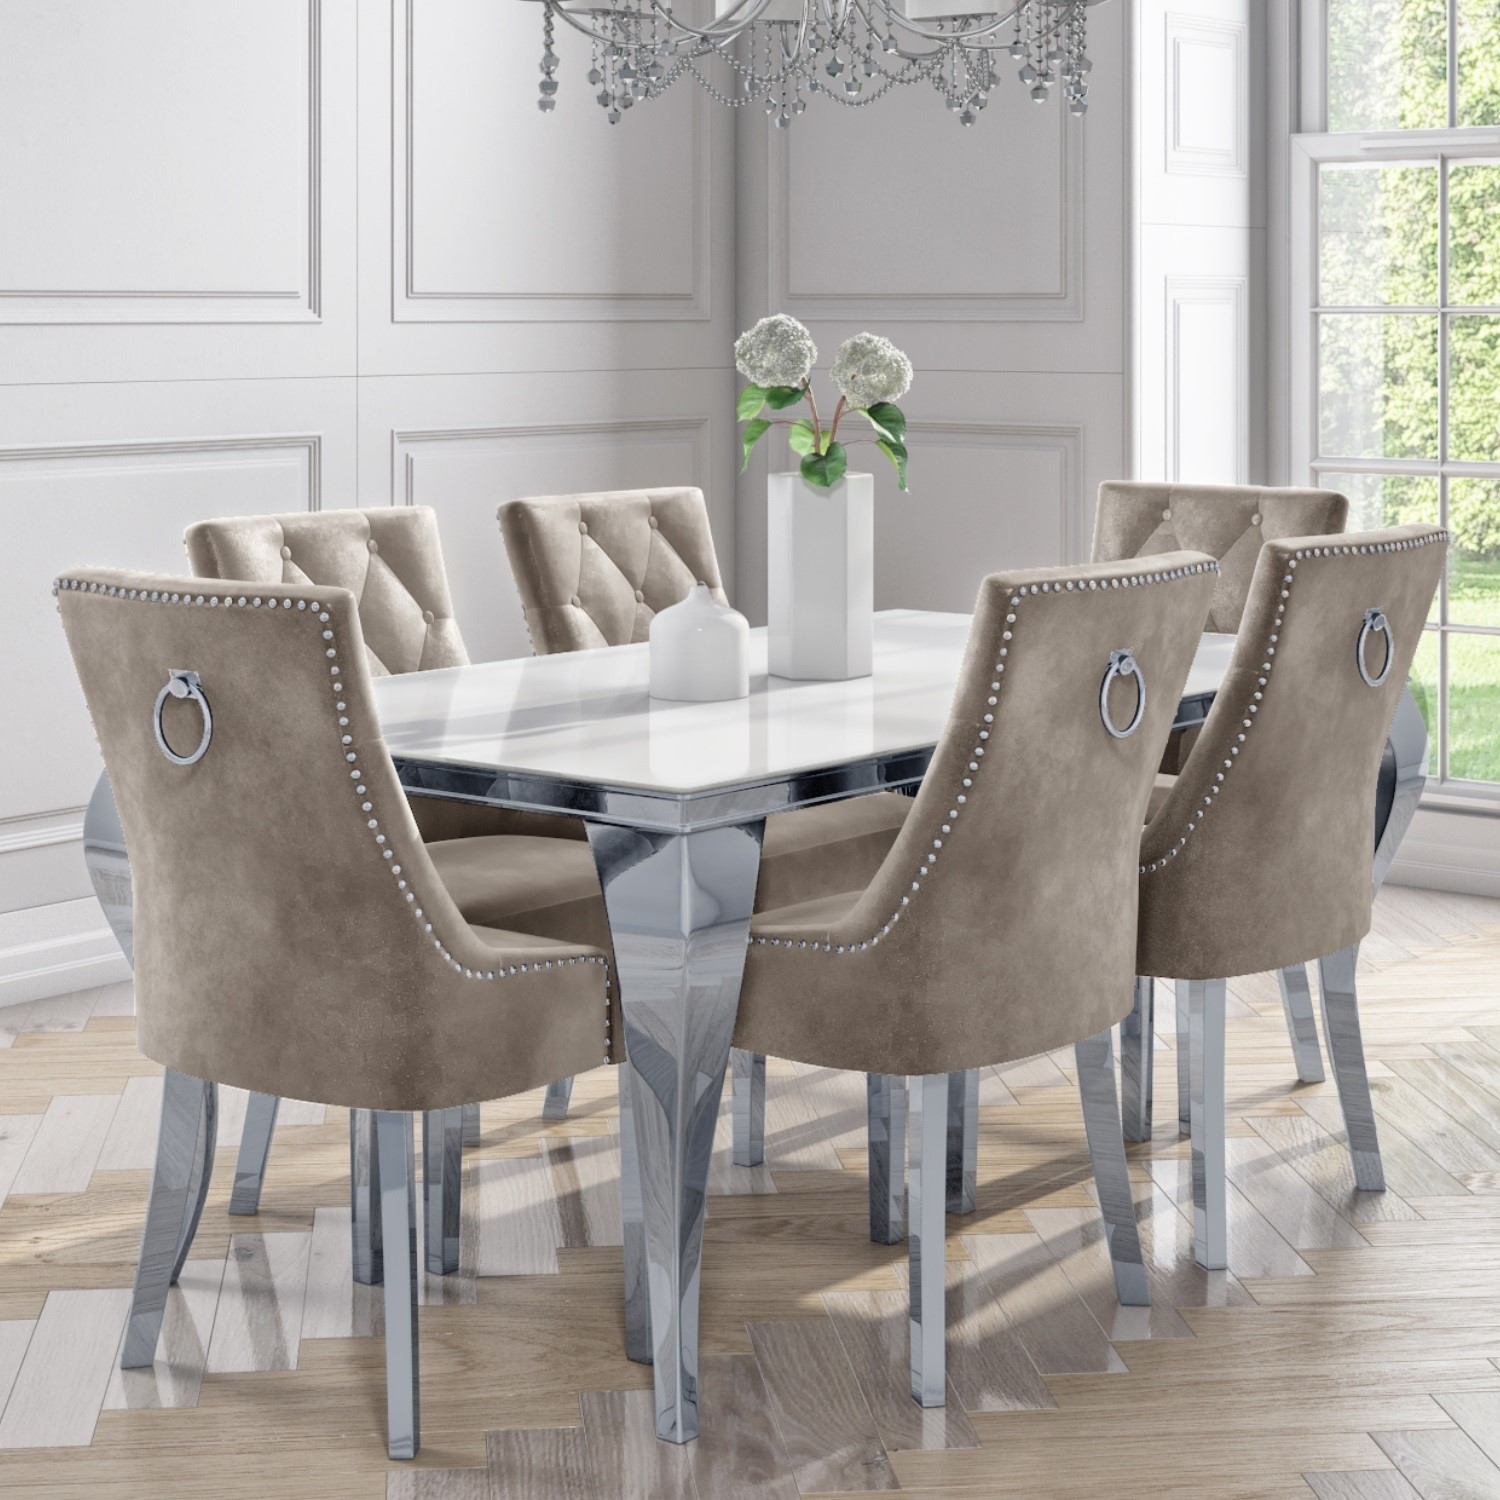 6 Seater Dining Set With White And Mirrored Table And Mink Velvet Chairs Jade Boutique Furniture123